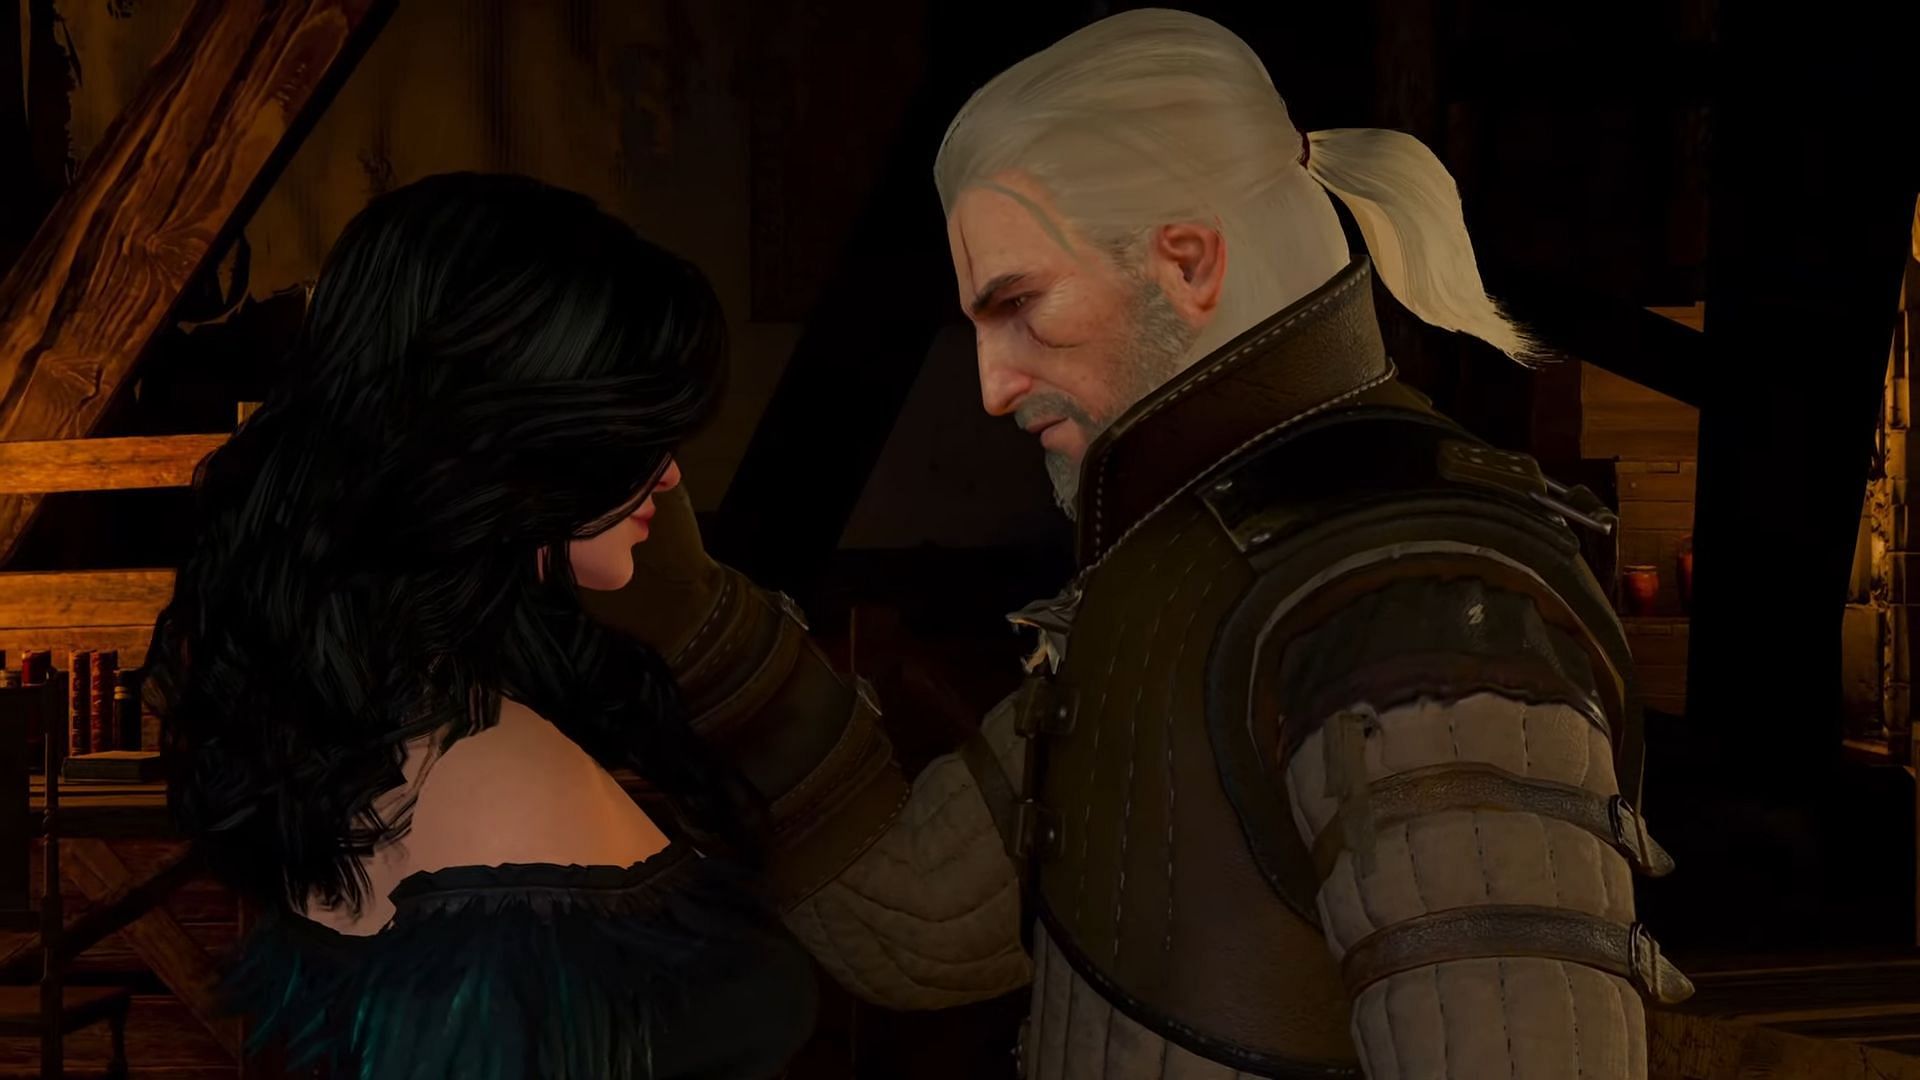 Here are five thing you might not have know about Geralt and Yennefer in the Witcher 3